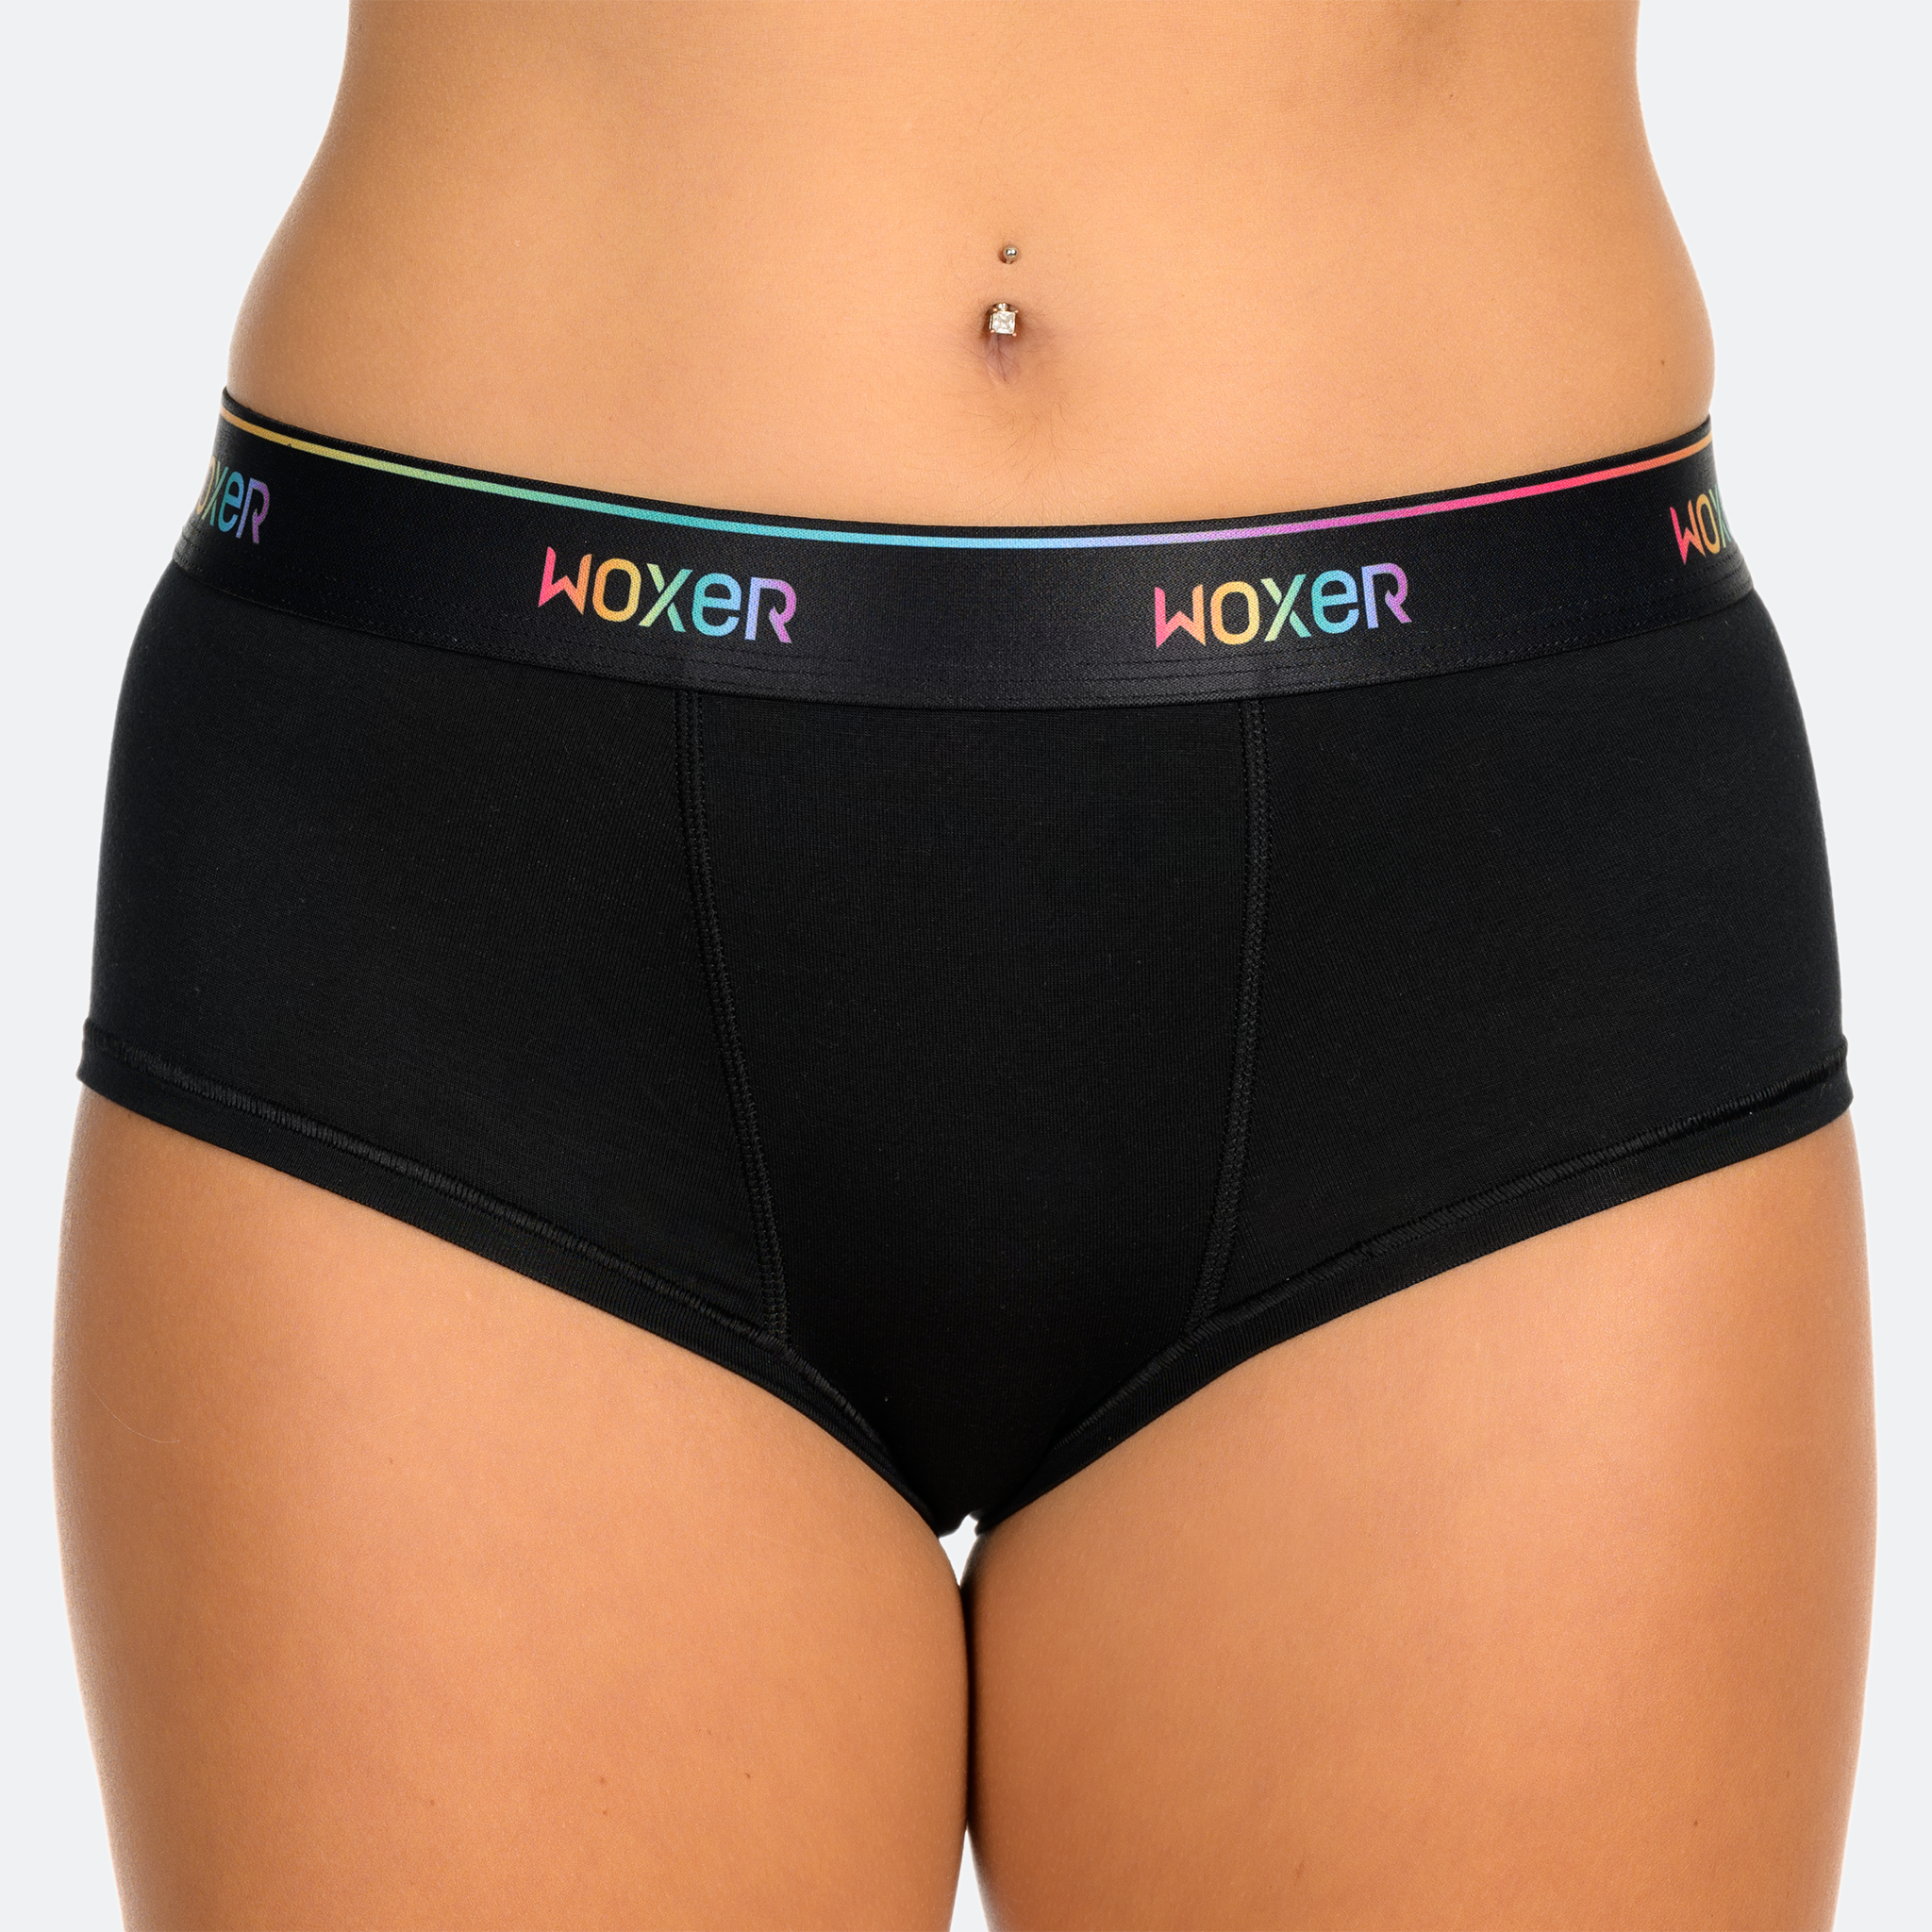 Boxer classic heather charcoal